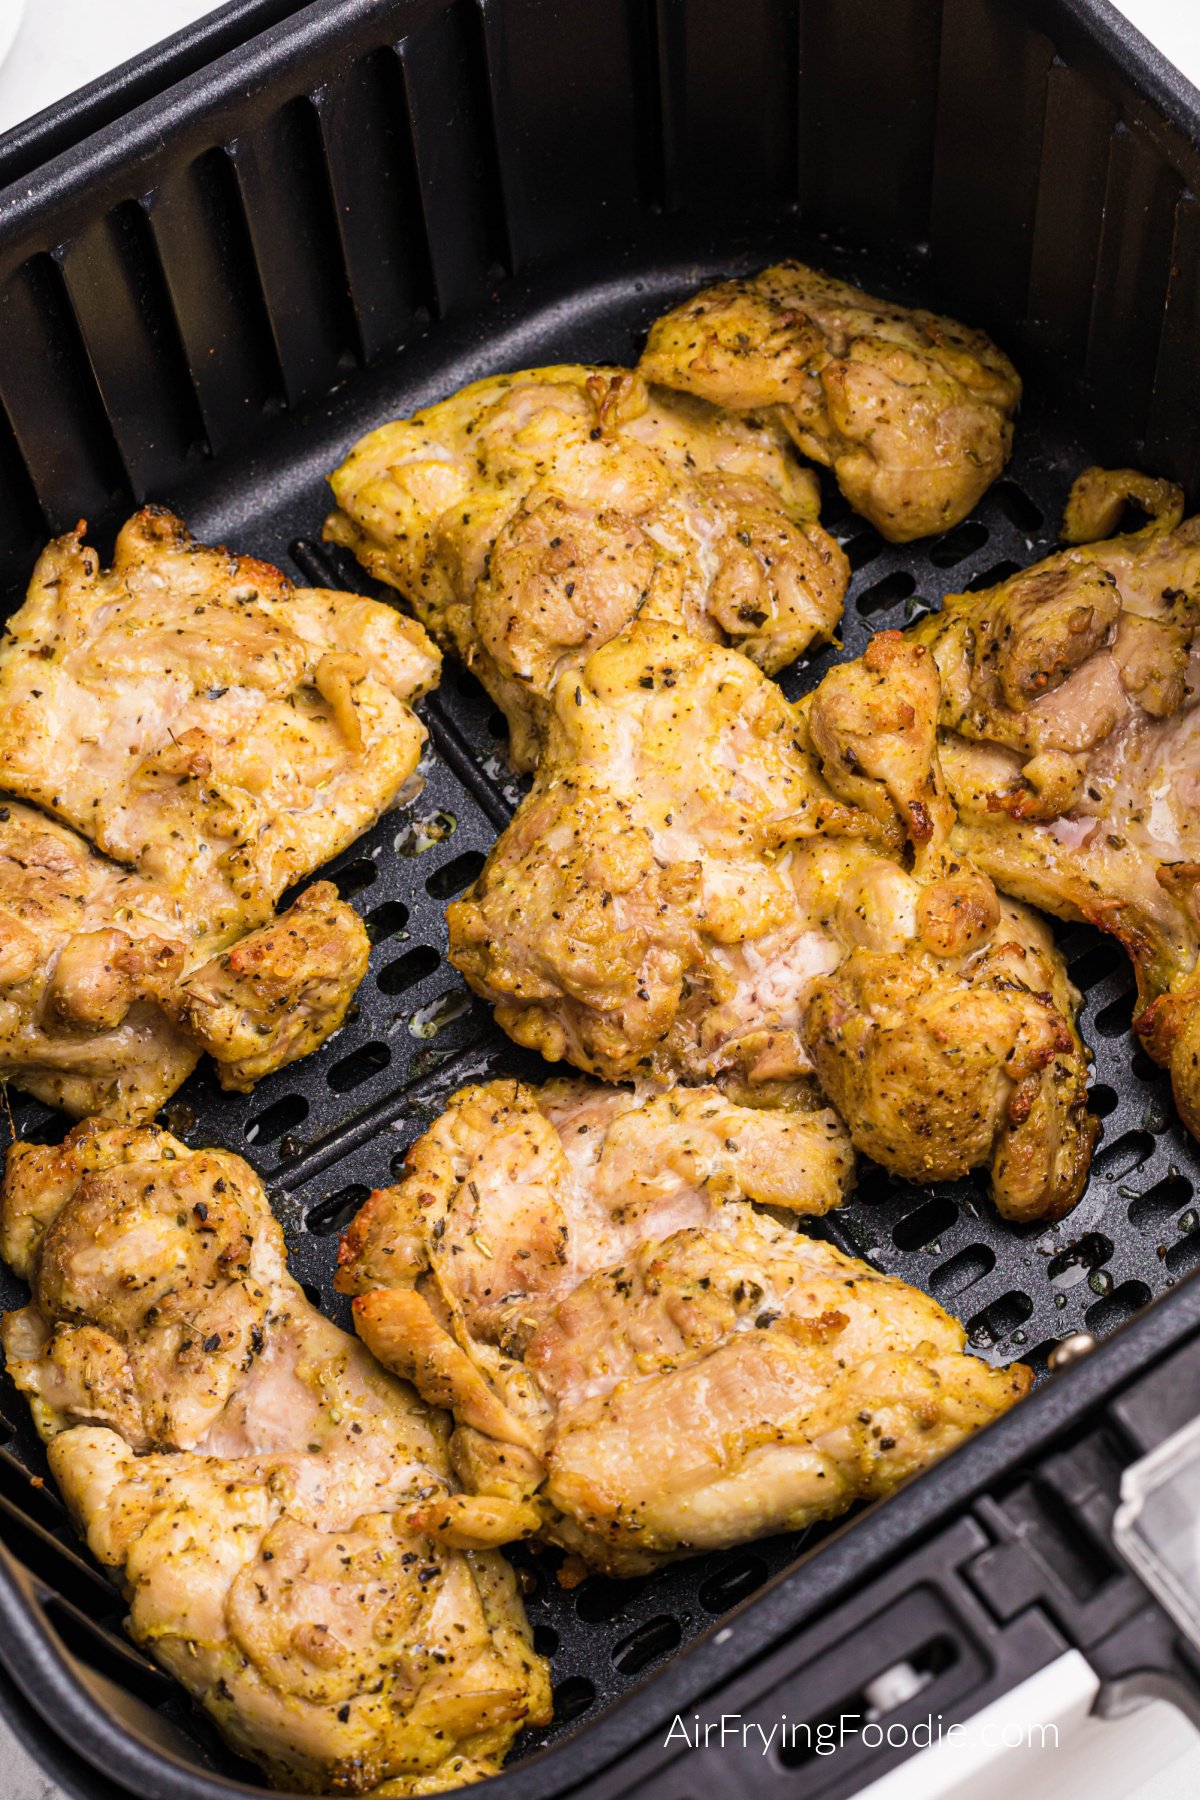 Seasoned lemon pepper chicken thighs in the basket of the air fryer, fully cooked and ready to serve.